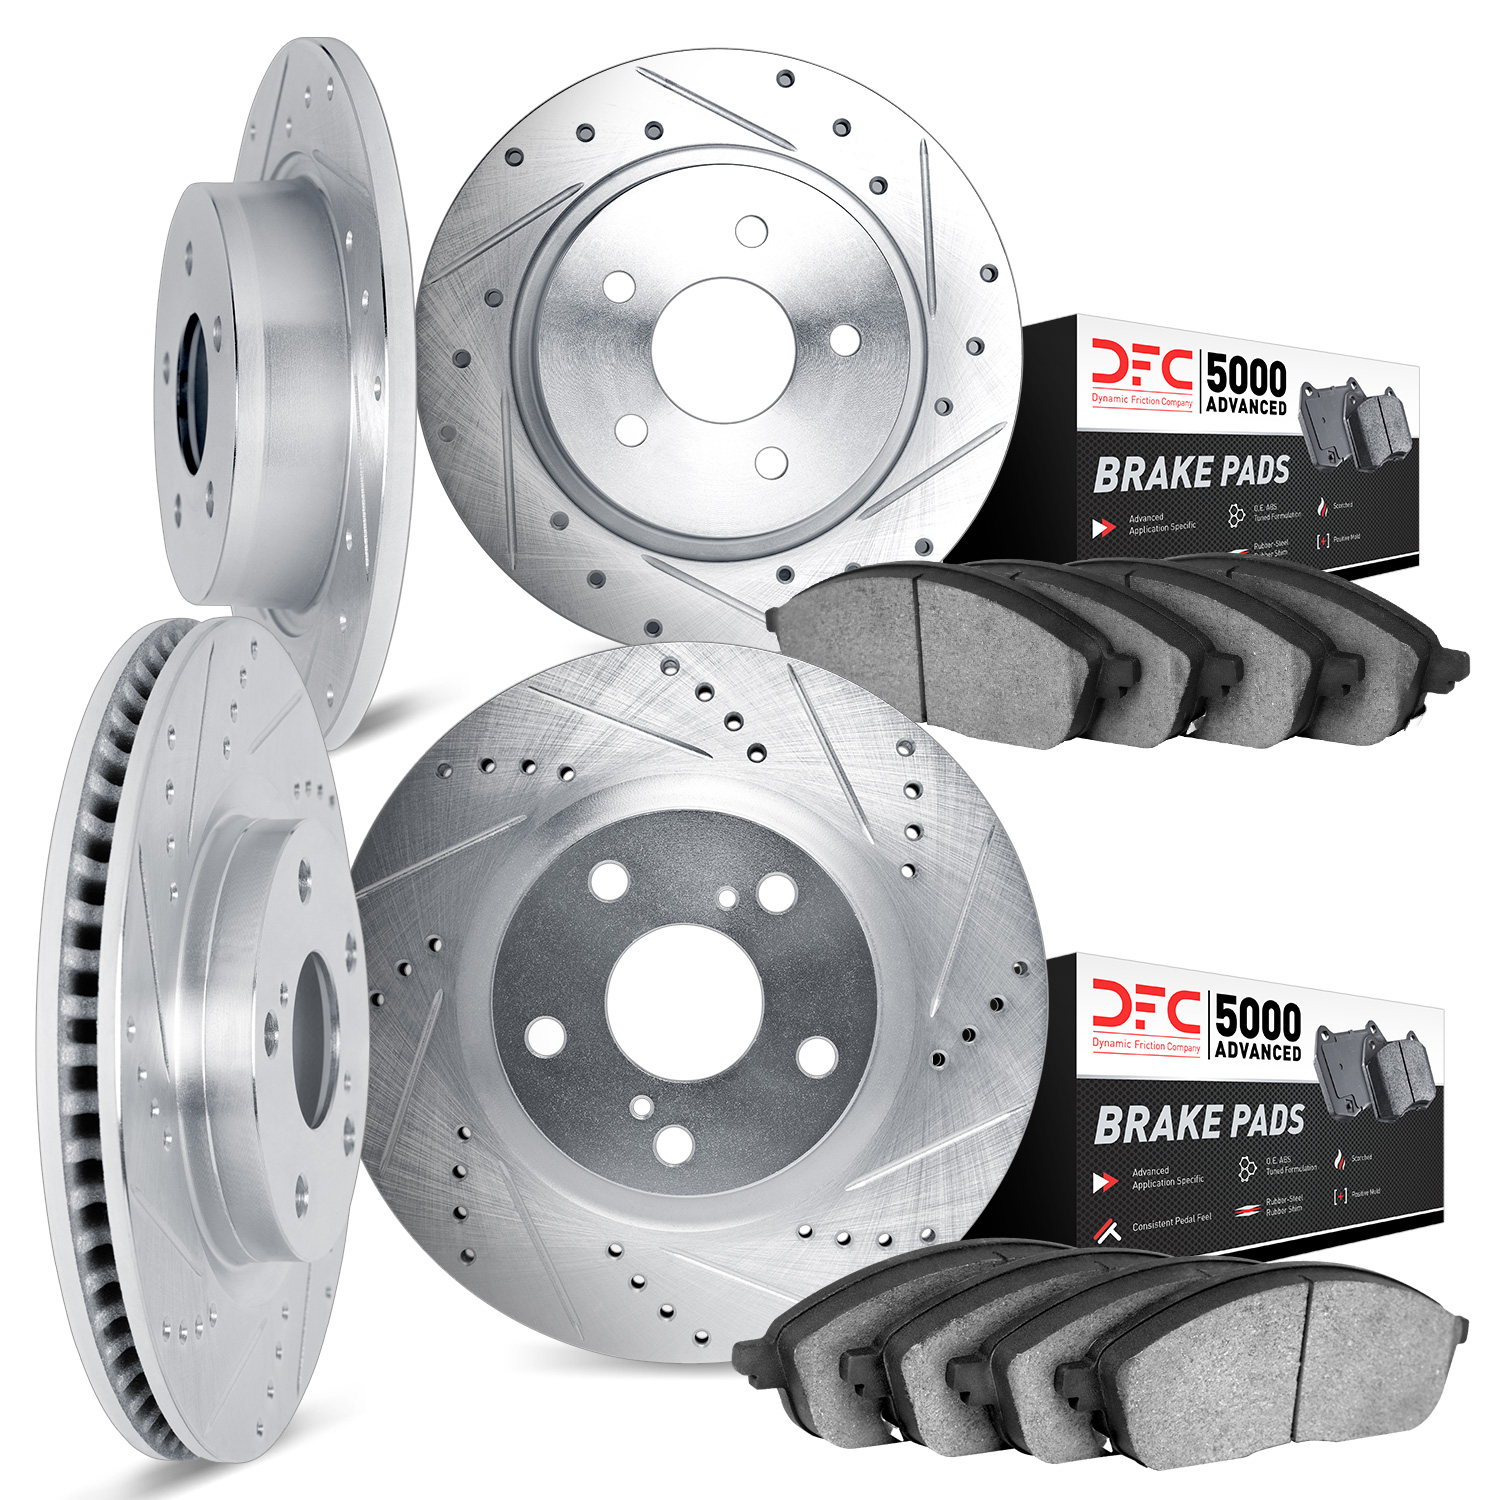 7504-42052 Drilled/Slotted Brake Rotors w/5000 Advanced Brake Pads Kit [Silver], Fits Select Mopar, Position: Front and Rear